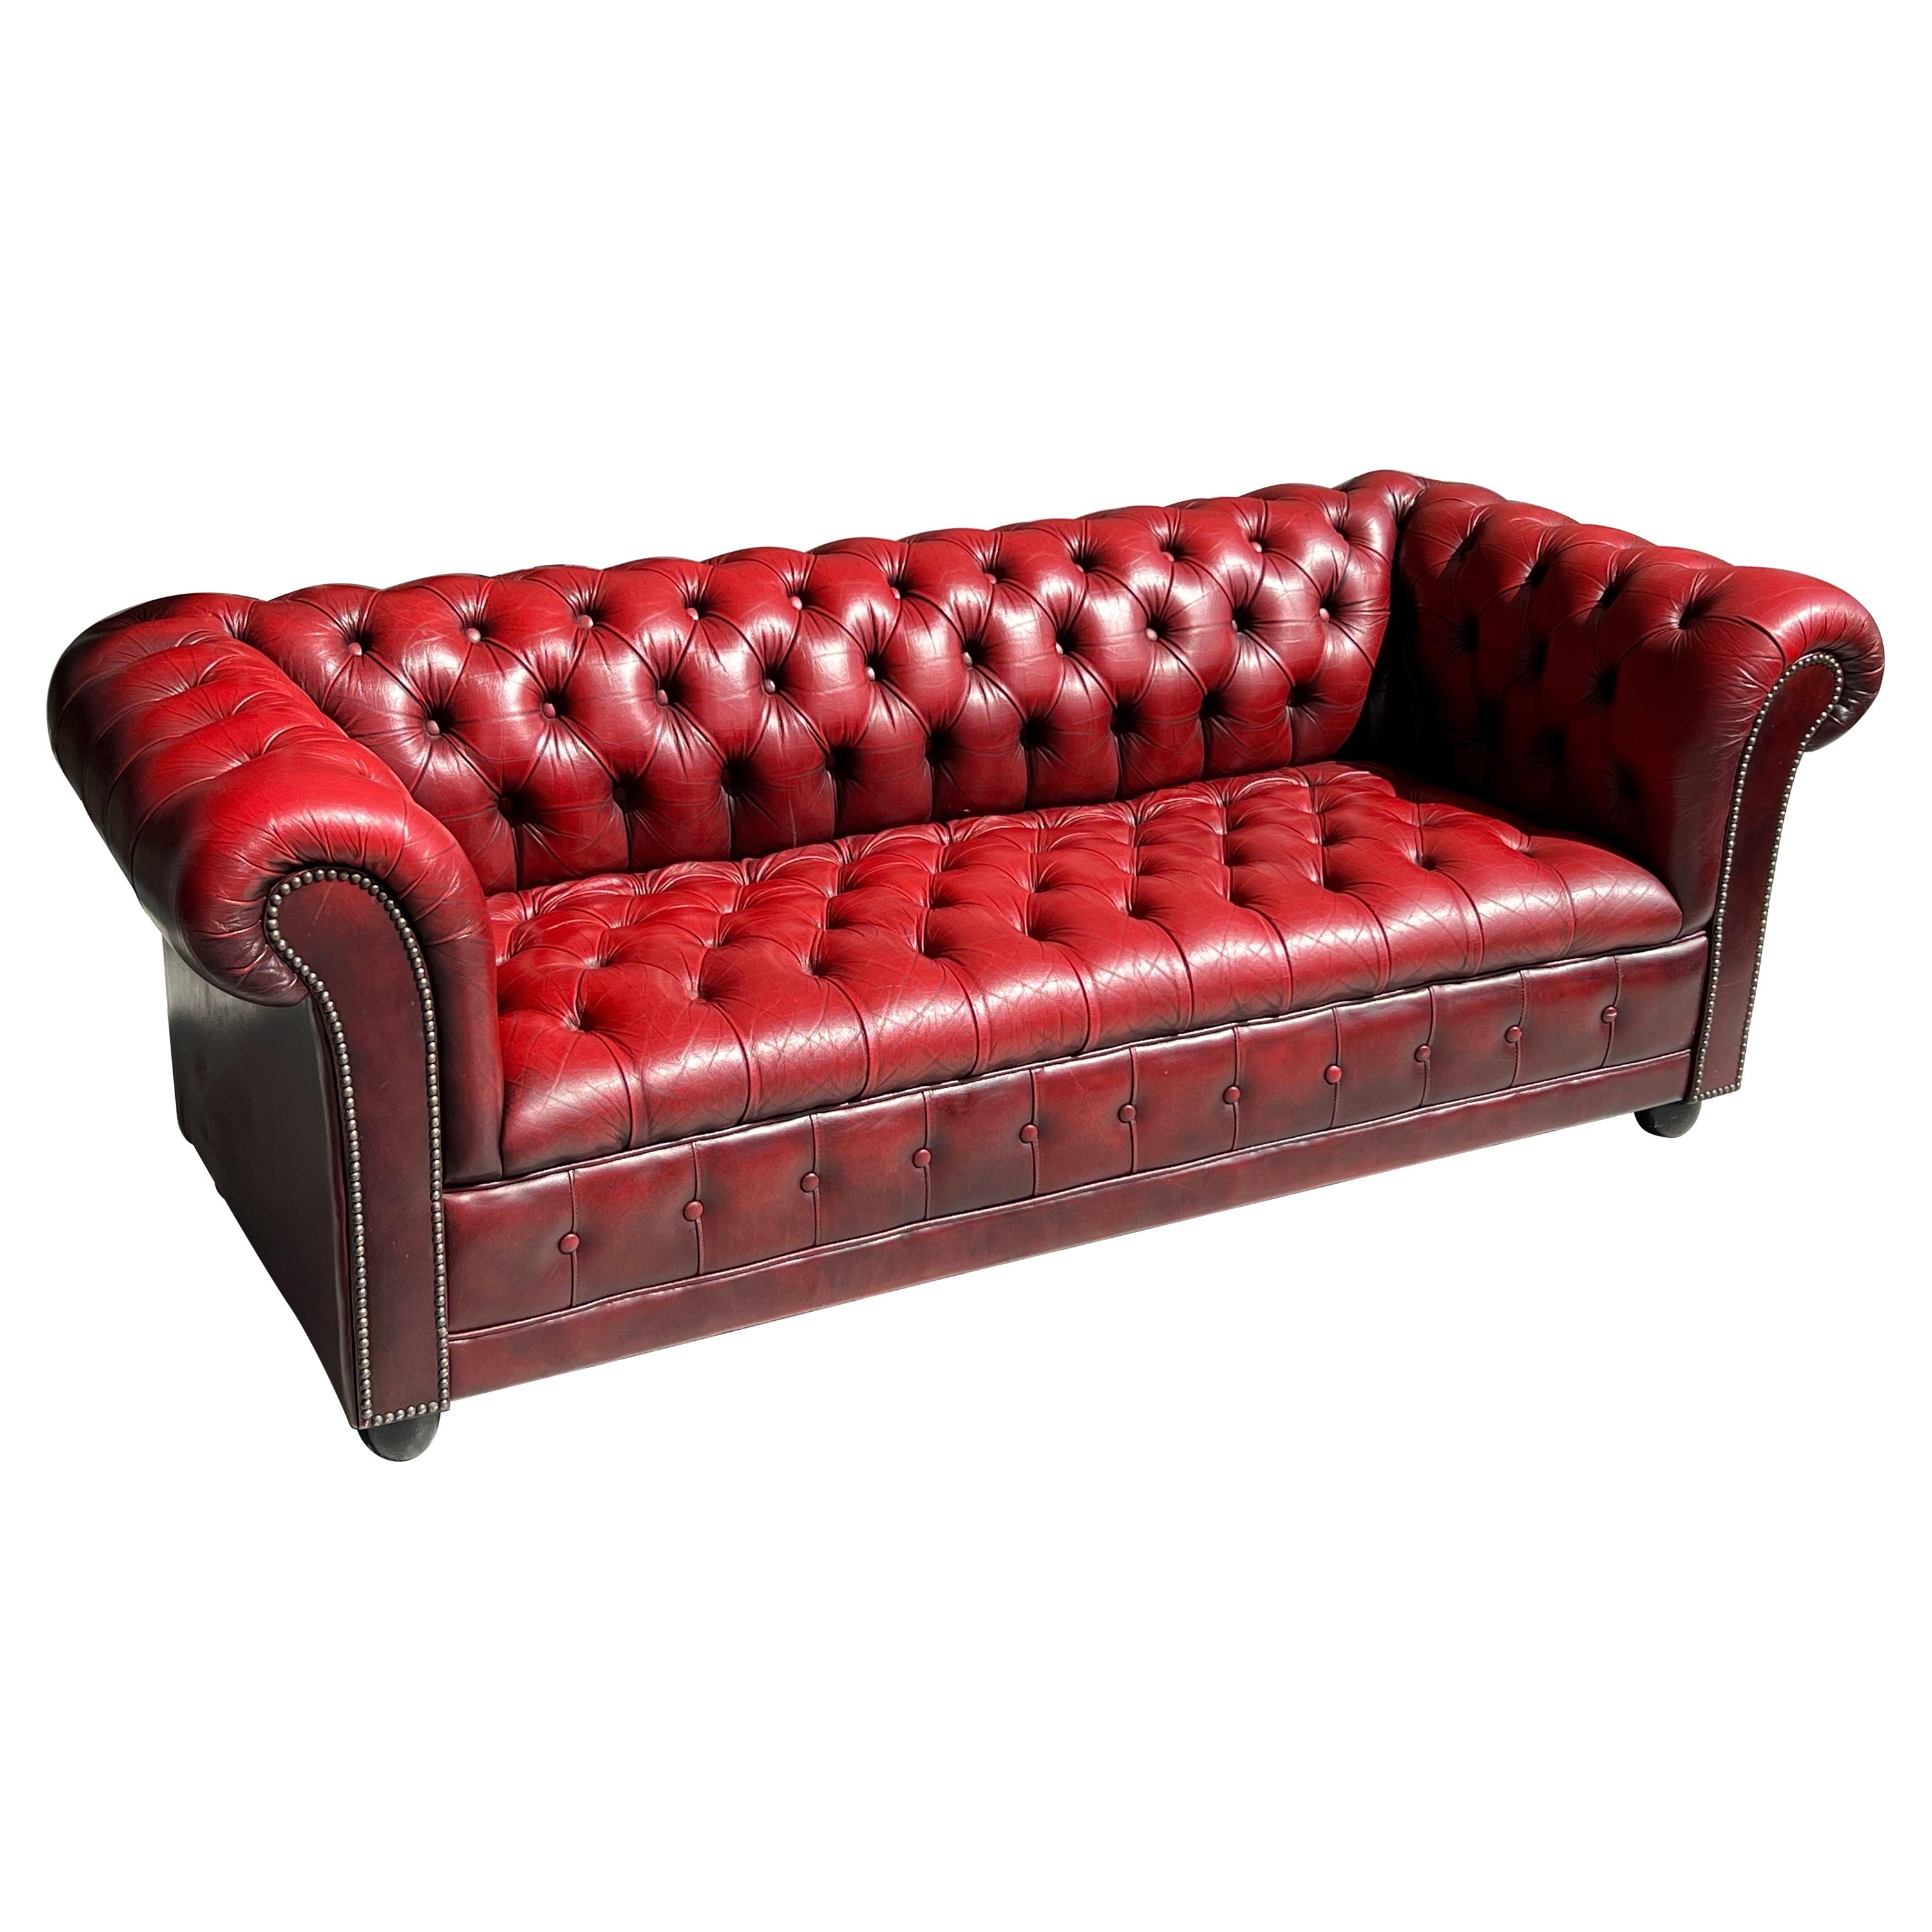 Red Chesterfield Leather Tufted Sofa